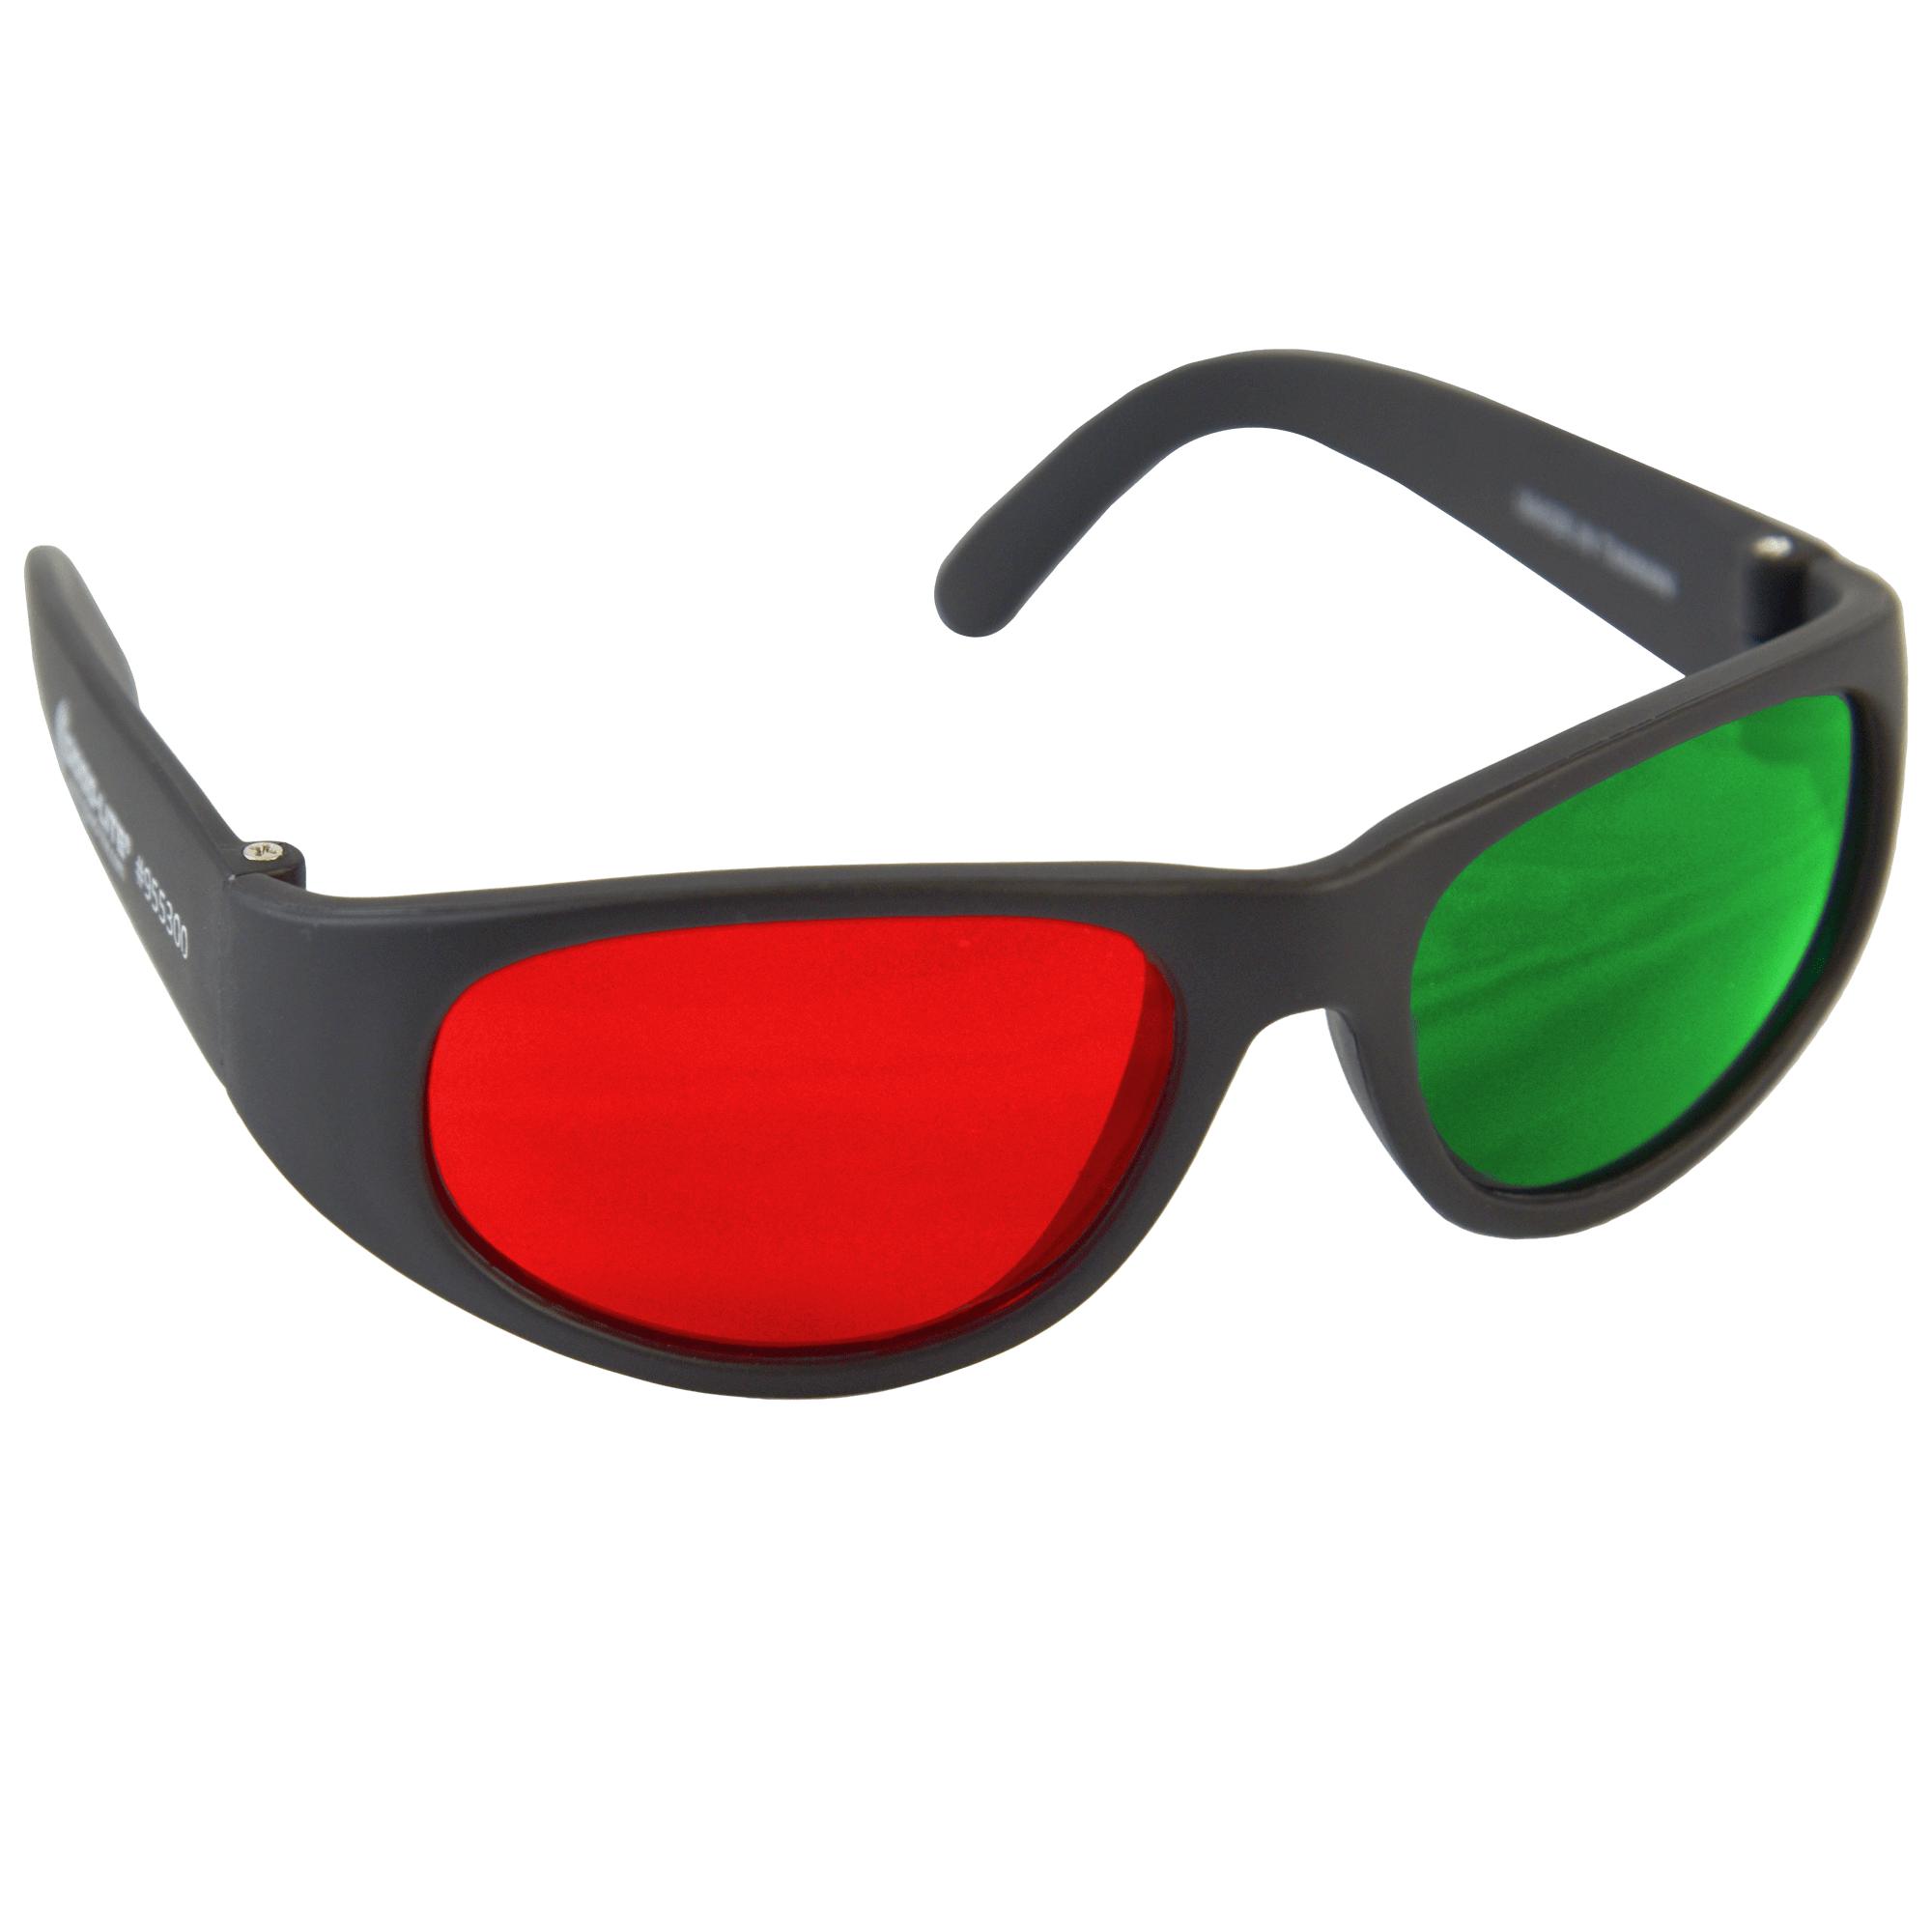 Reverse Wraparound Red/Green Glasses (Adult)